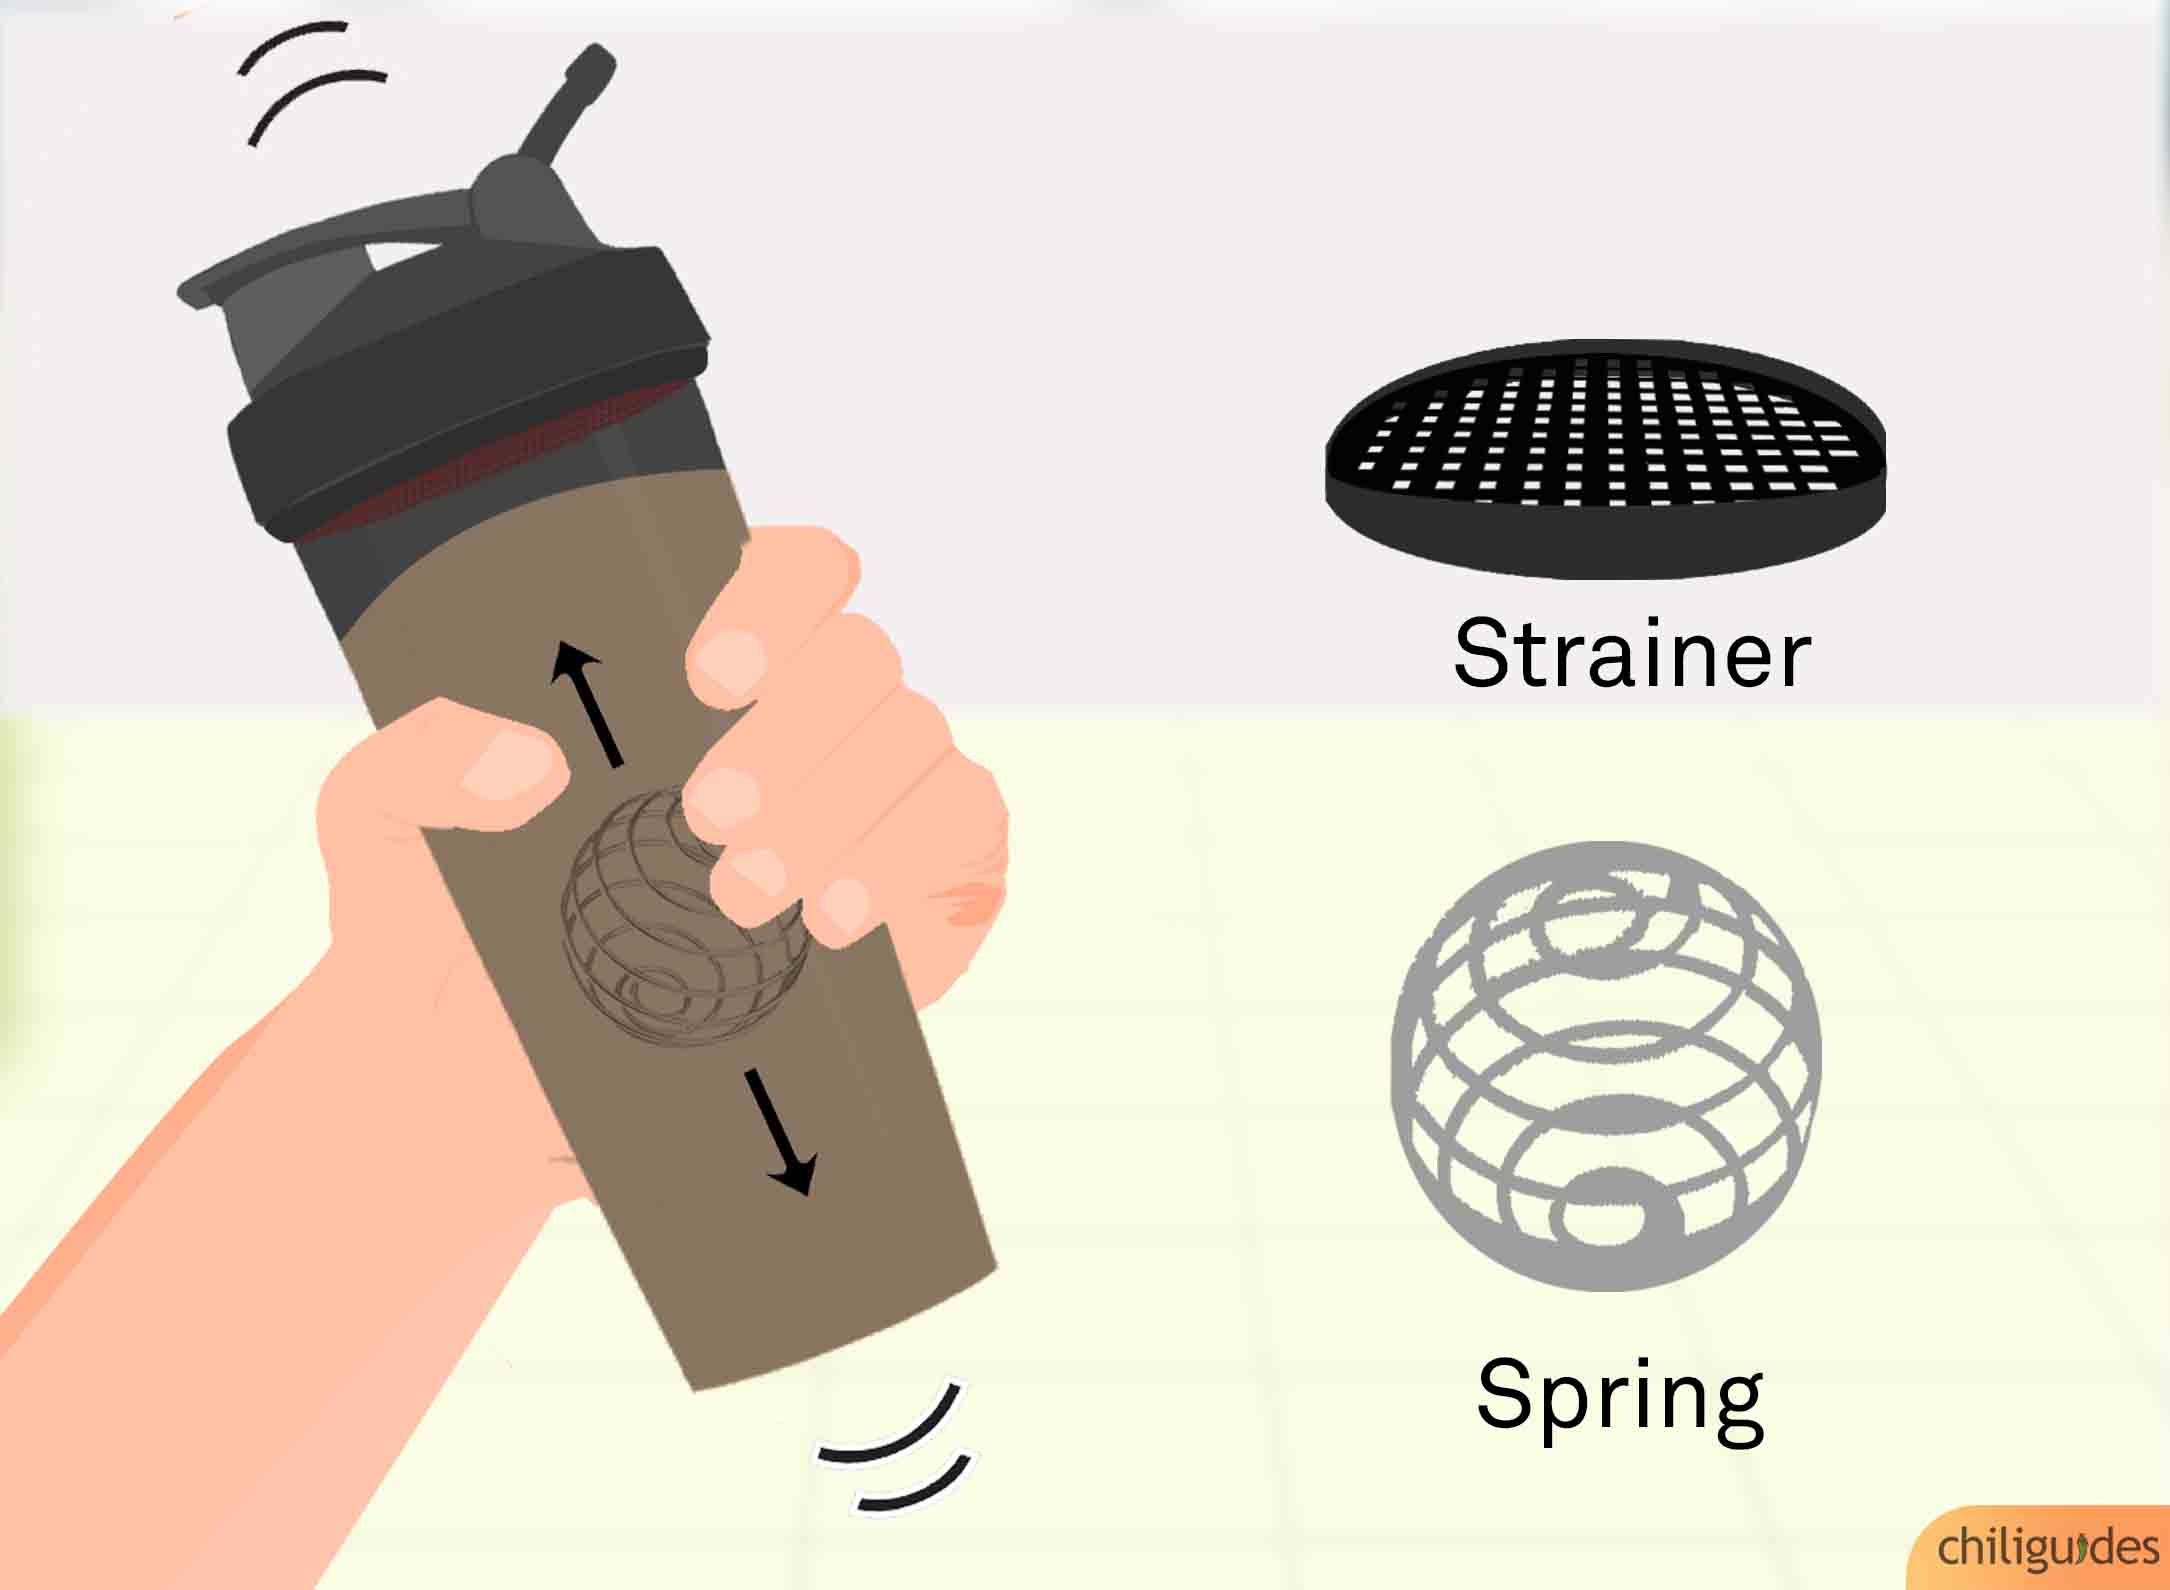 There must be a spring or strainer type object to mix the powder and water.